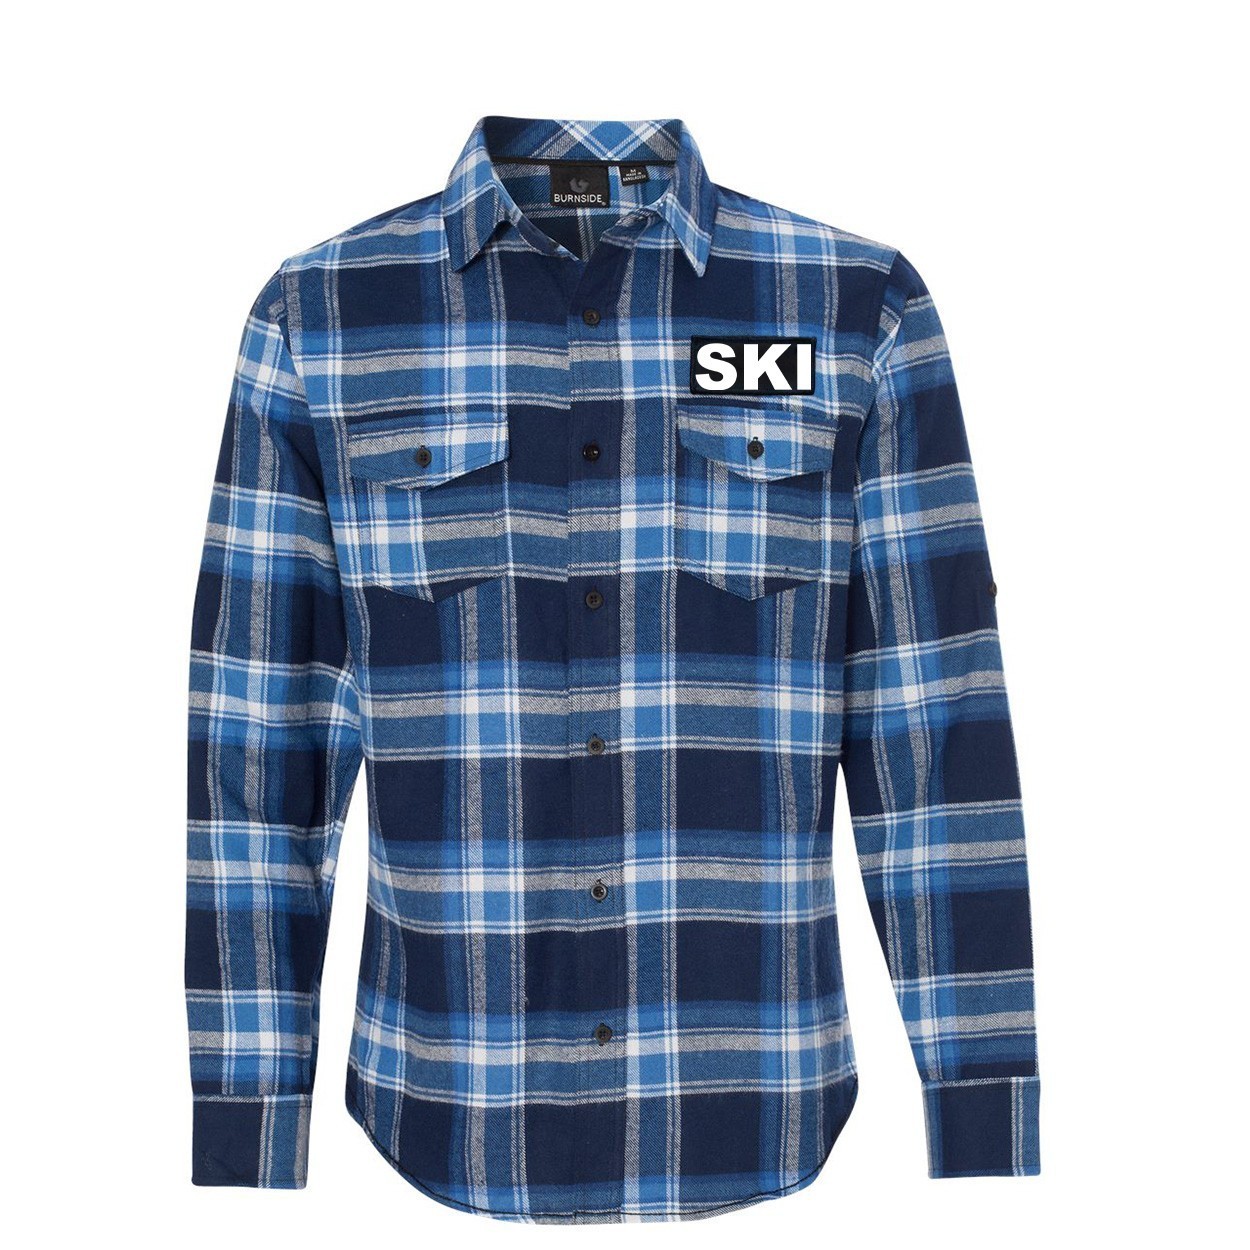 Ski Brand Logo Night Out Rectangle Woven Patch Flannel Shirt Long Sleeve Blue/White